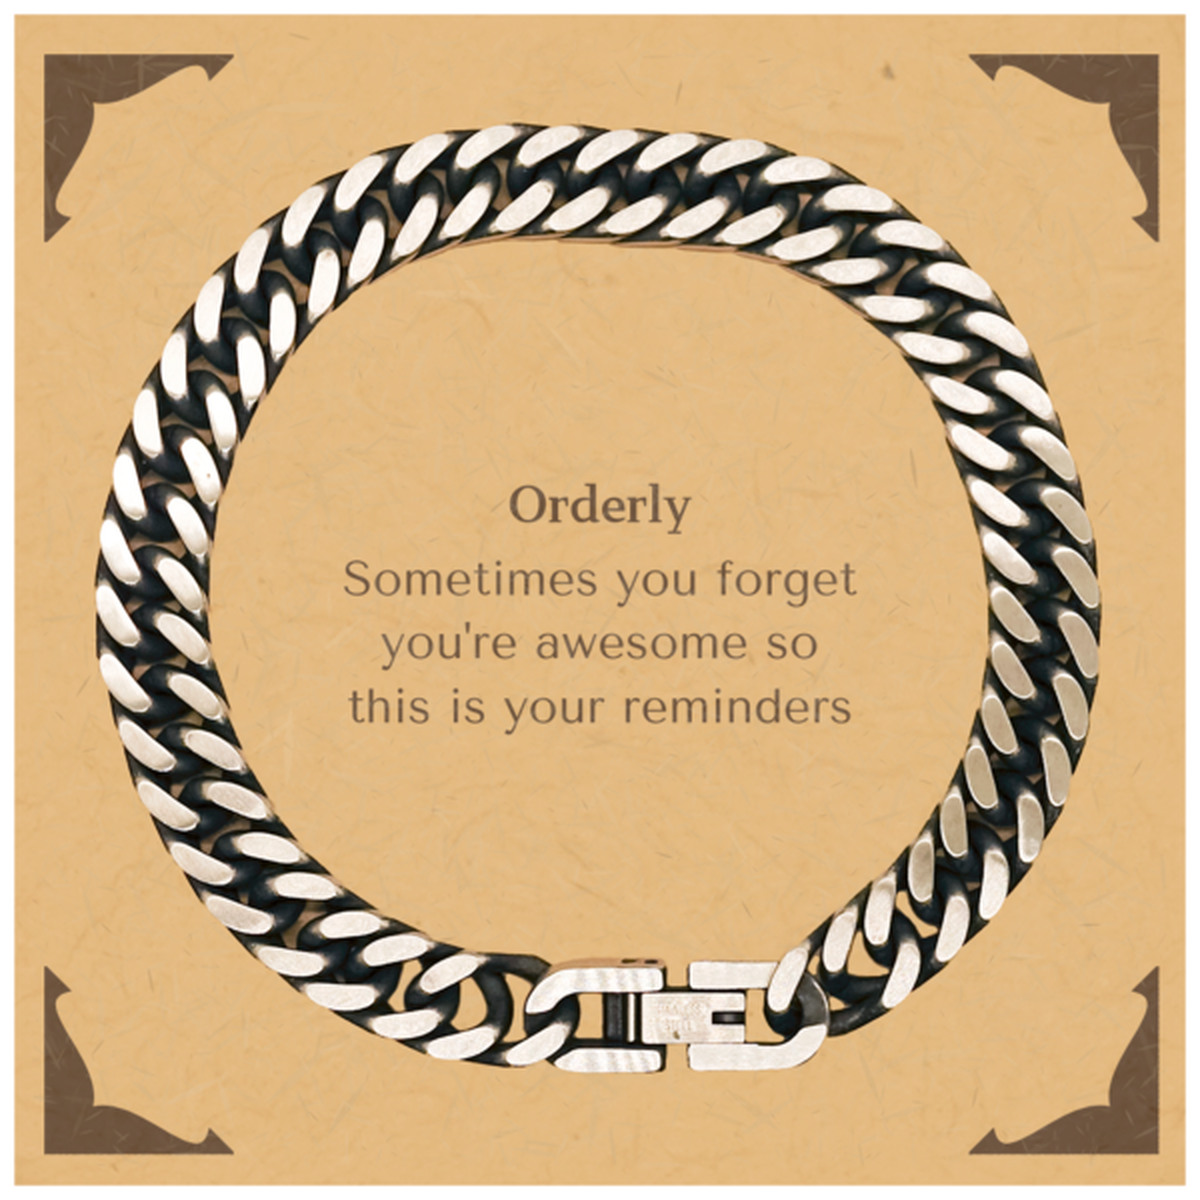 Sentimental Orderly Cuban Link Chain Bracelet, Orderly Sometimes you forget you're awesome so this is your reminders, Graduation Christmas Birthday Gifts for Orderly, Men, Women, Coworkers